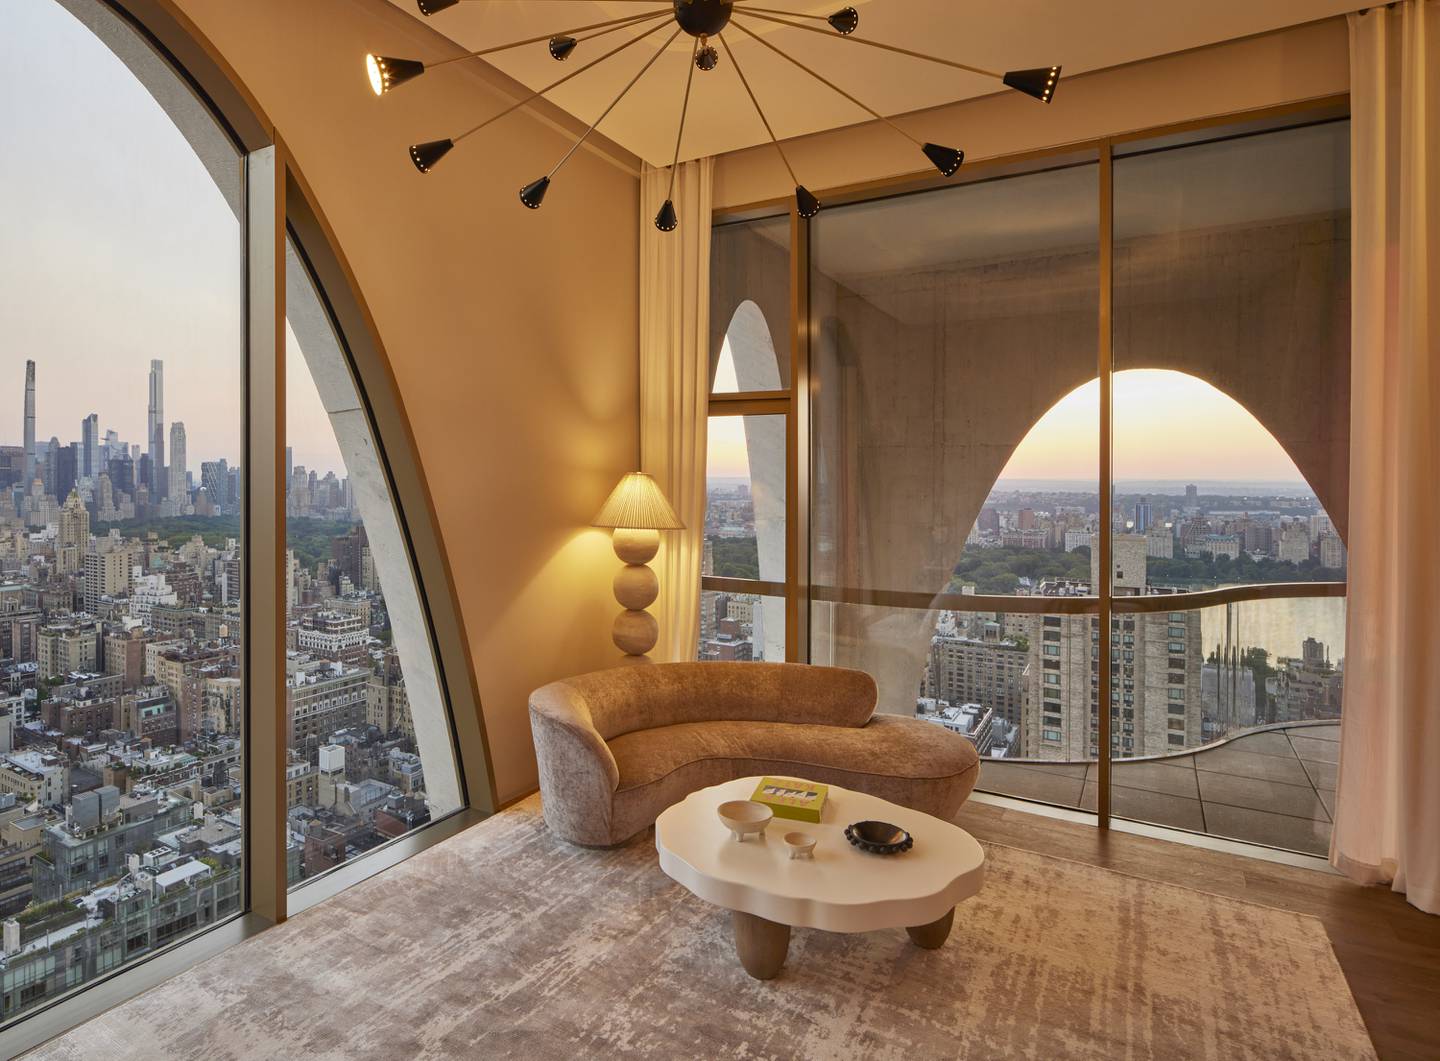 Succession Kendall Roy’s Penthouse Hits Market For 29m The Irish Times